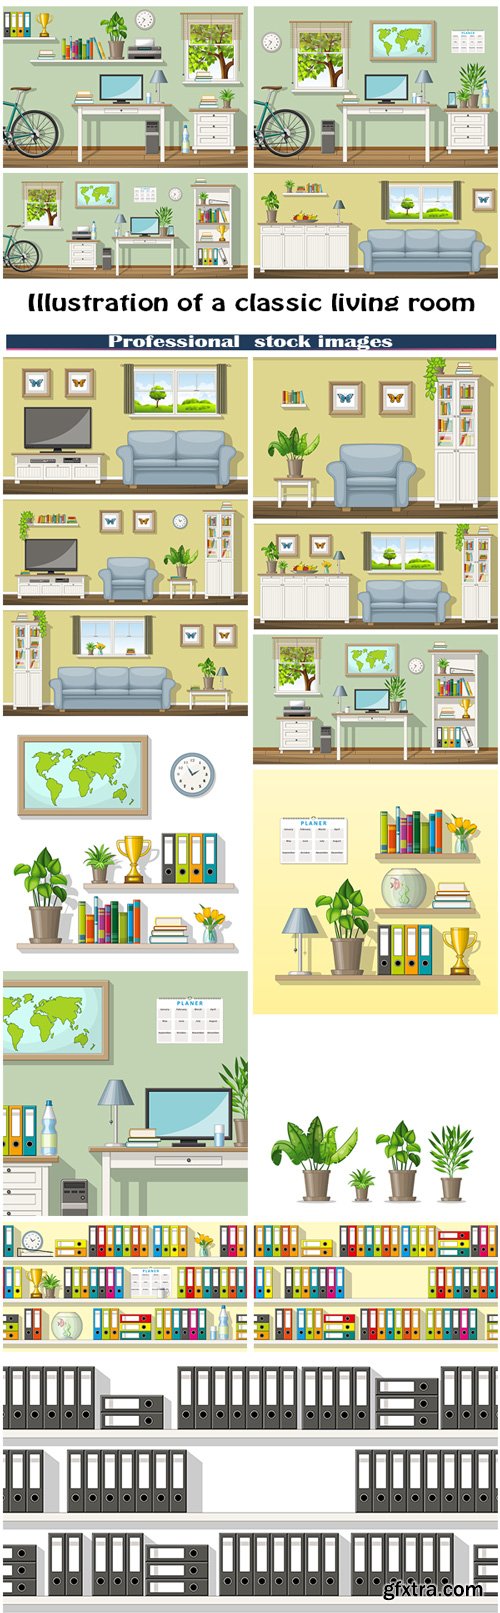 Illustration of a classic living room and folders on shelves